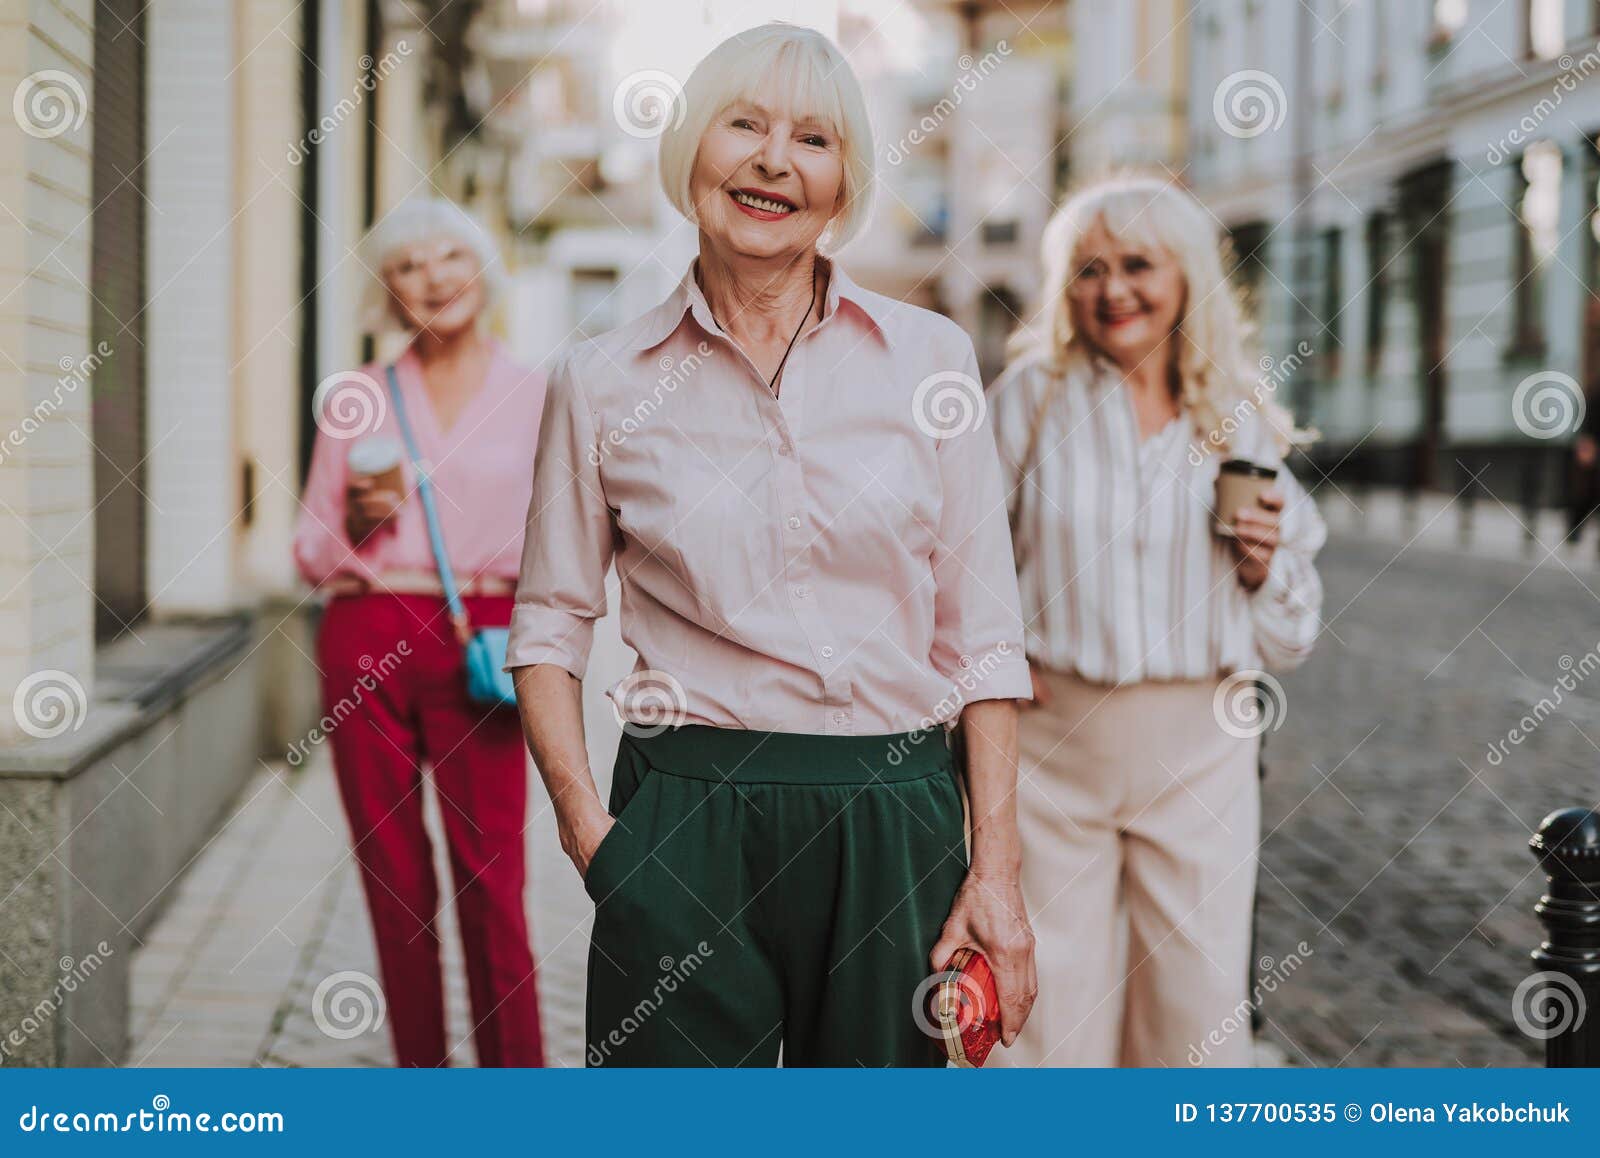 Beautiful Old Lady Standing with Hers Friends Stock Image - Image of ...